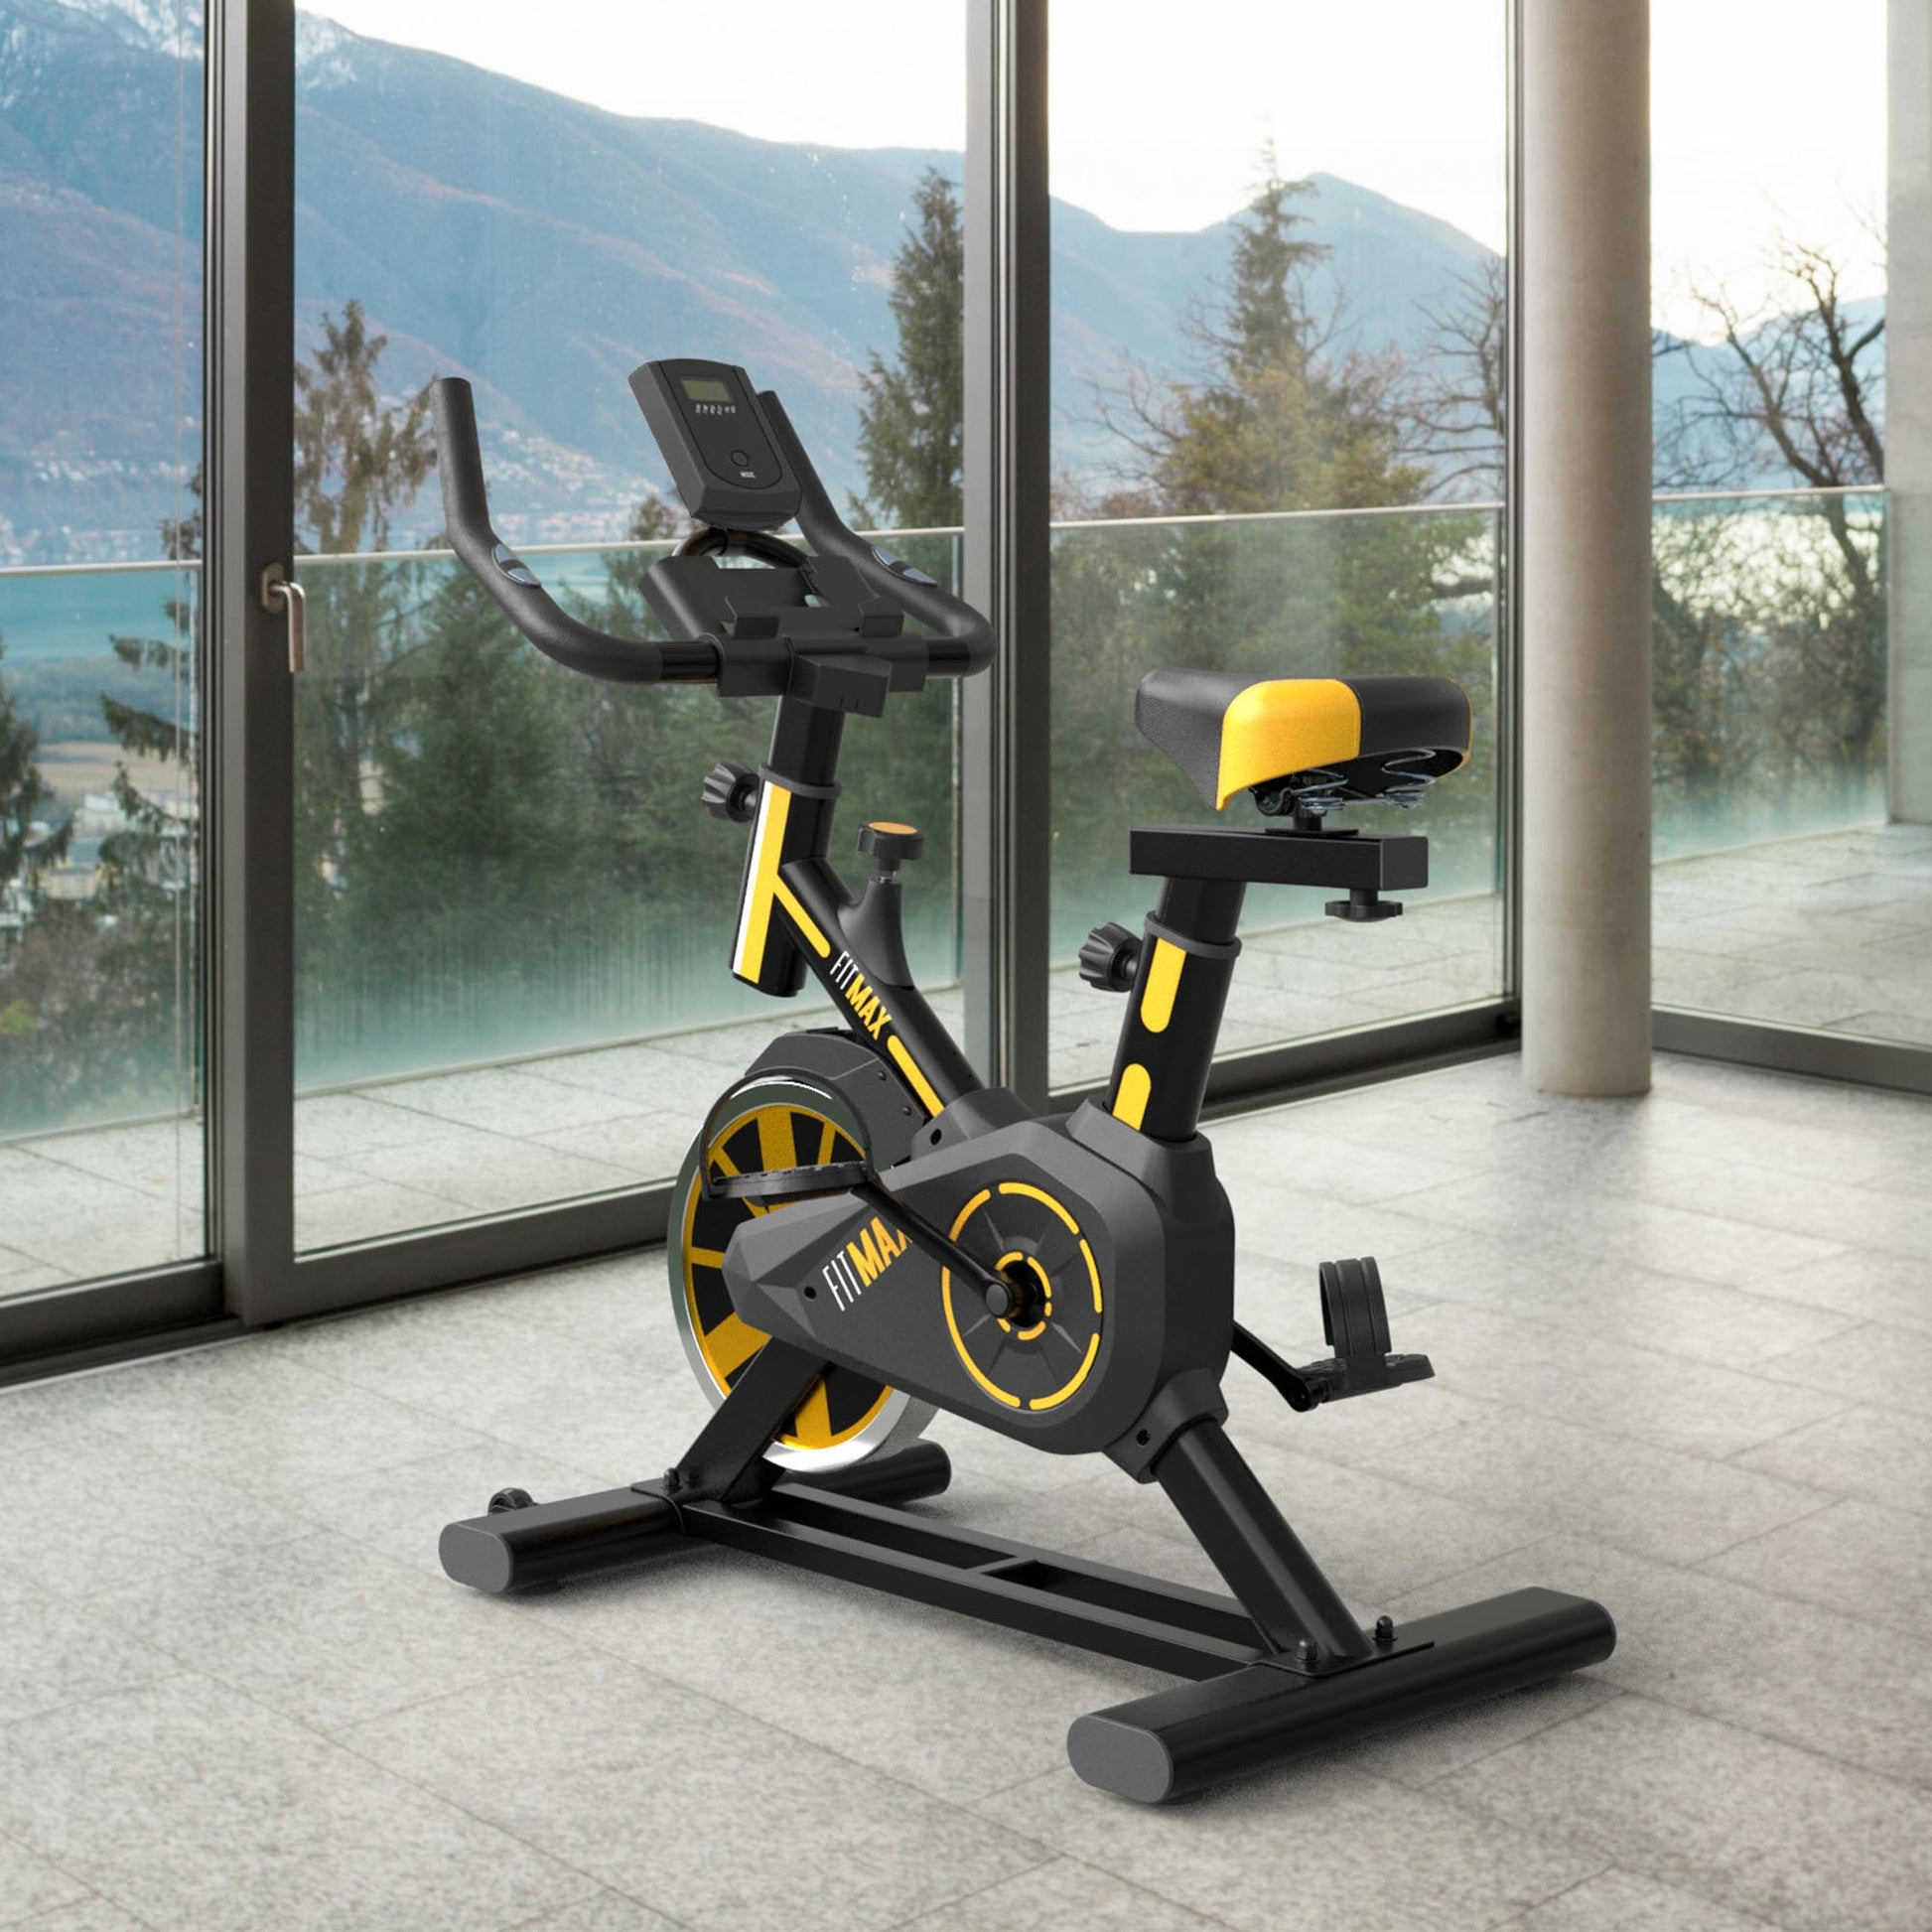 Bicicleta Spinning Fitmax SBY40 Foto Ambientada